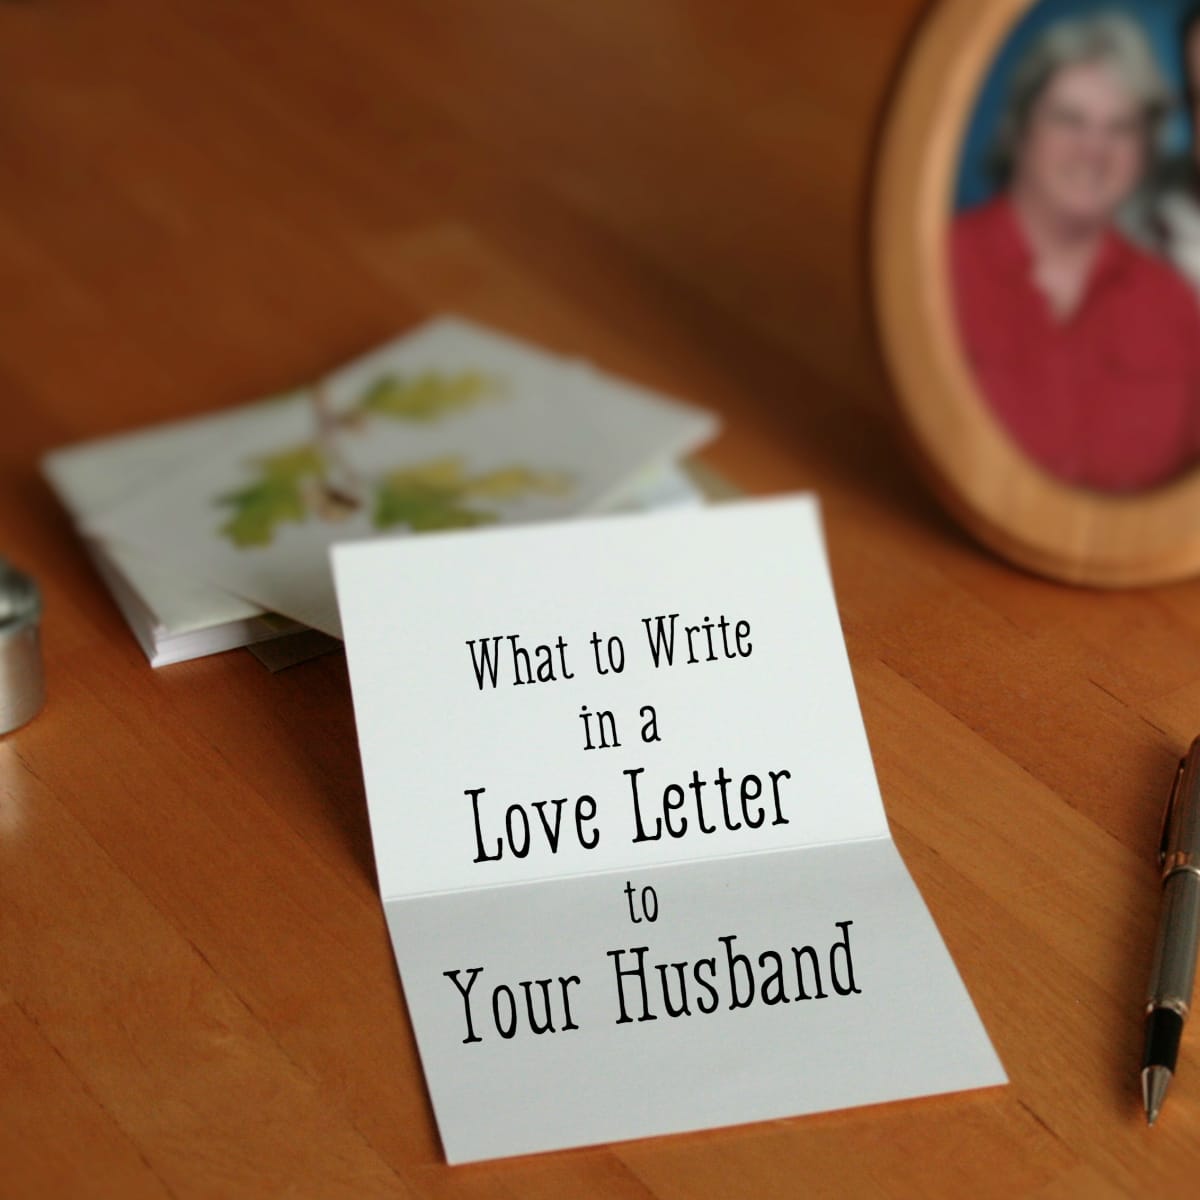 Help me to write a love letter